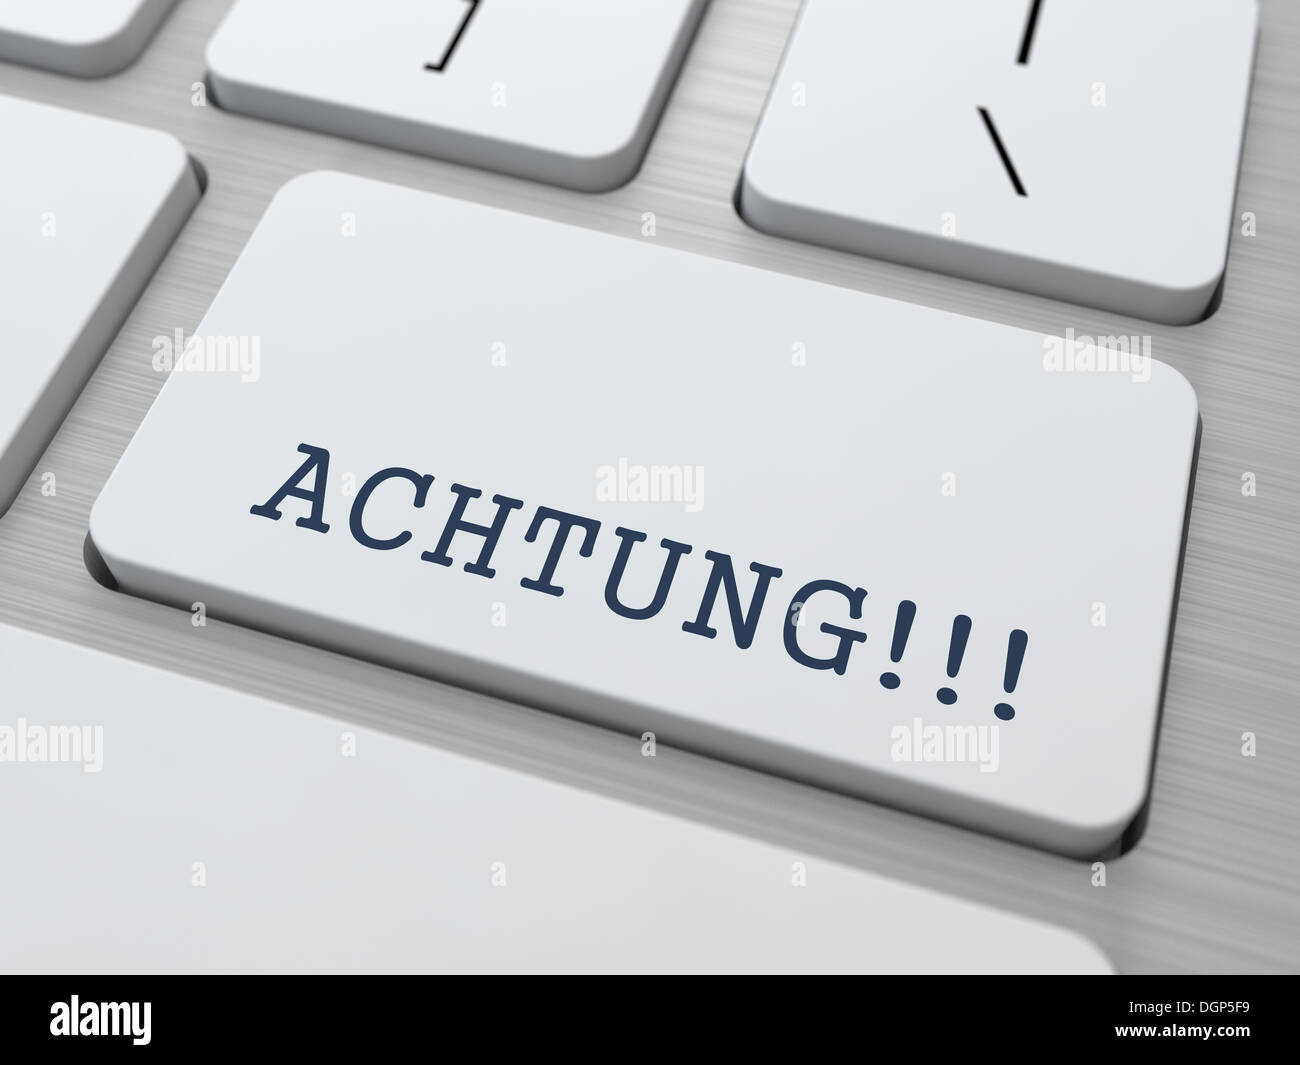 ACHTUNG!!! - Button on Keyboard. Stock Photo